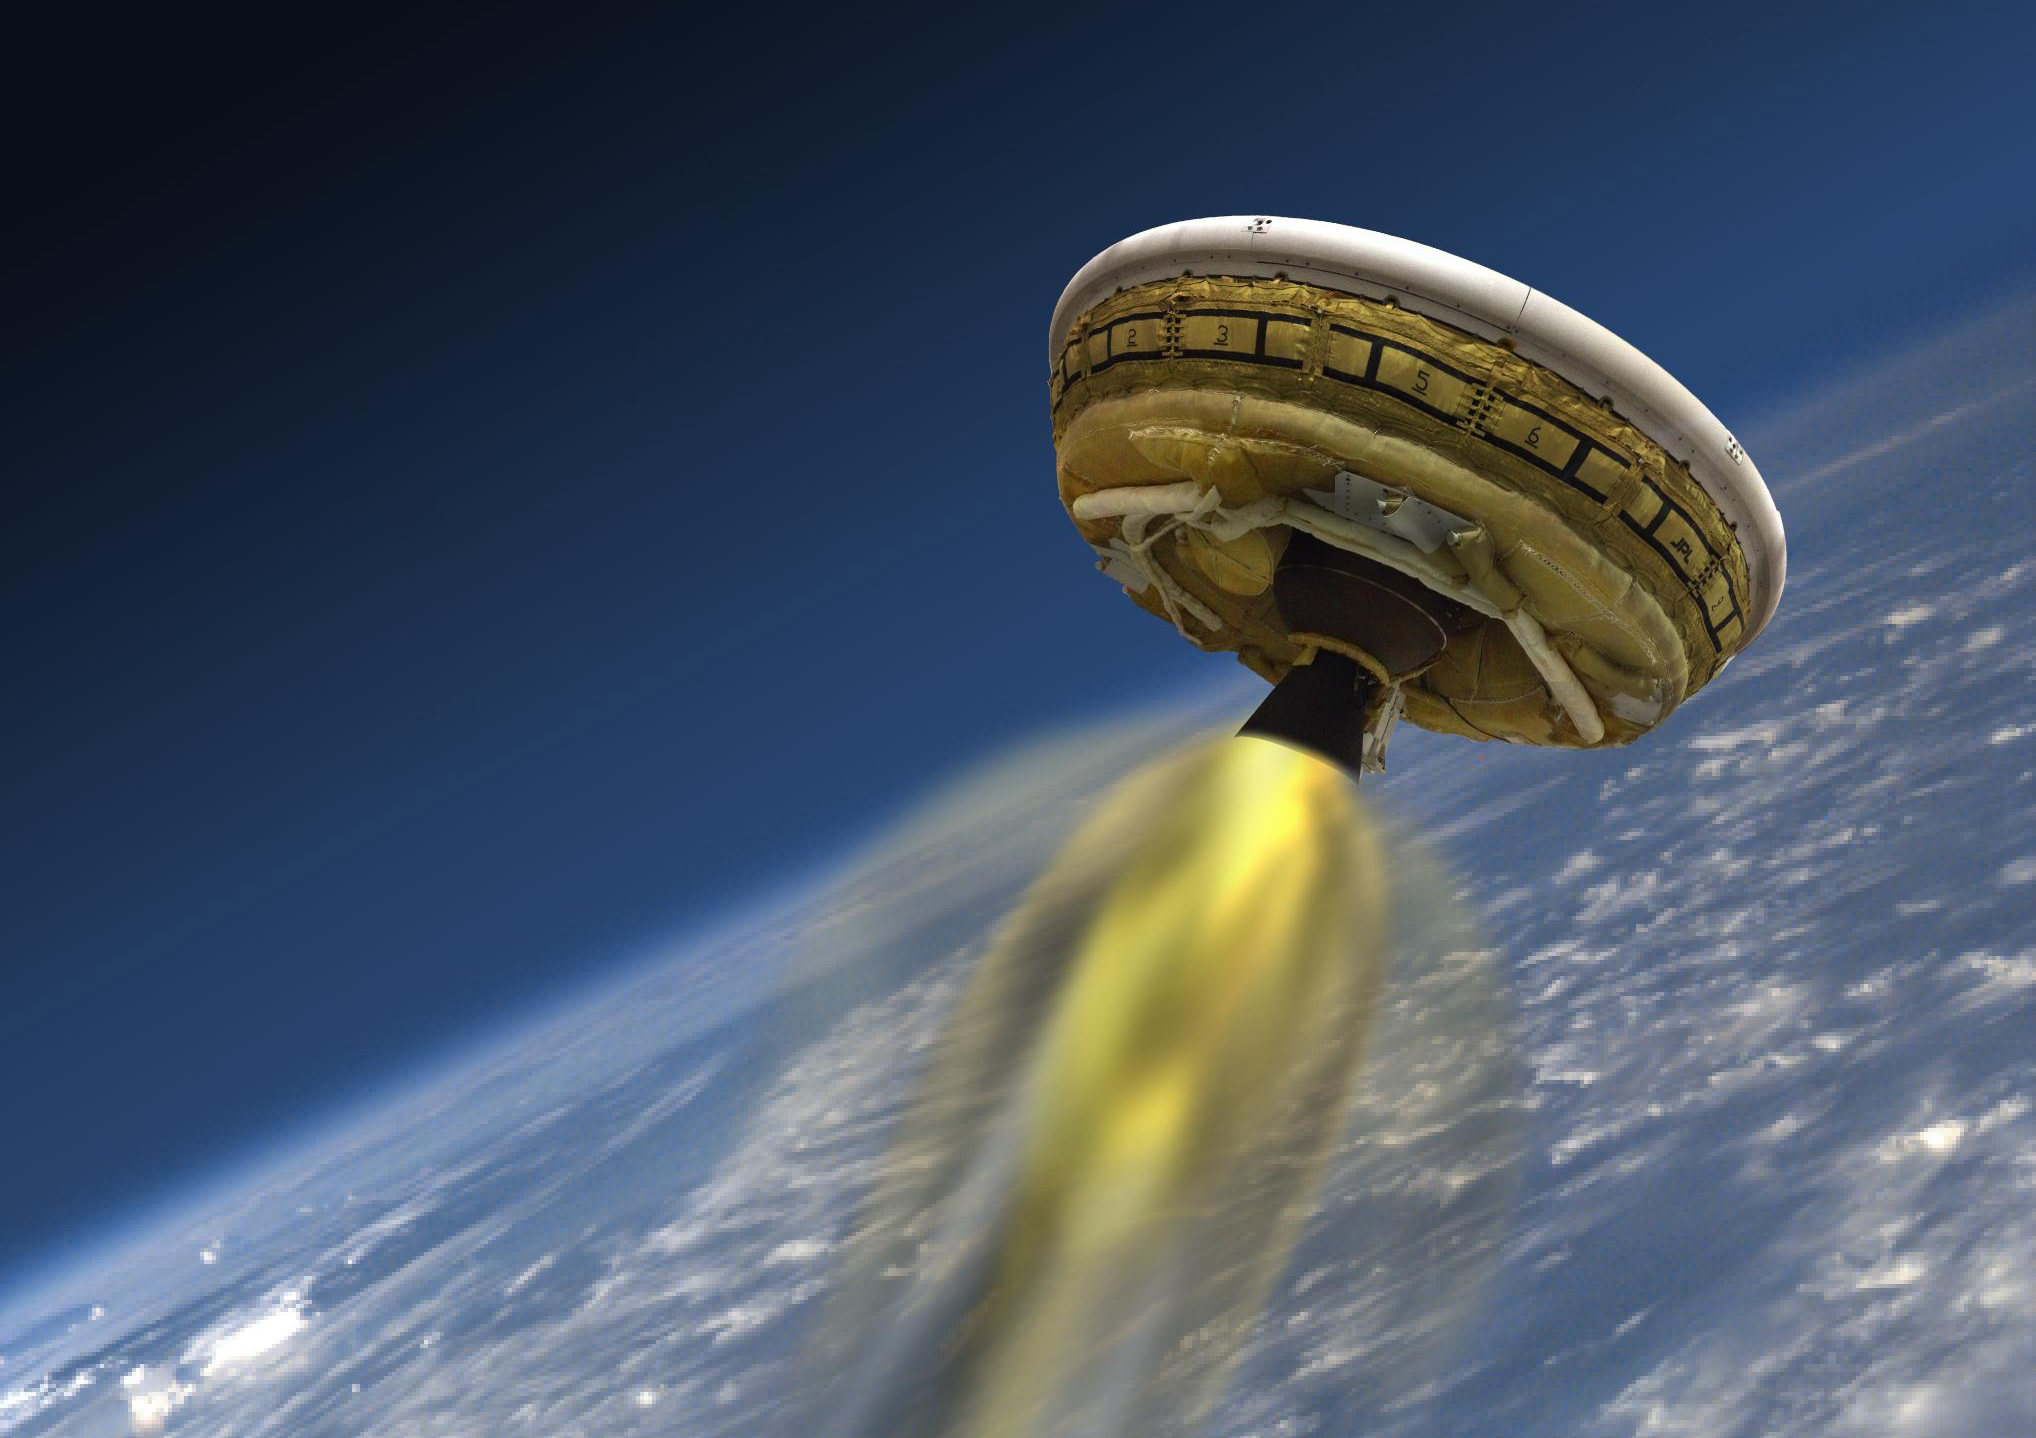 This artist's concept shows the test vehicle for NASA's Low-Density Supersonic Decelerator (LDSD), designed to test landing technologies for future Mars missions. A balloon will lift the vehicle to high altitudes, where a rocket will take it even higher, to the top of the stratosphere, at several times the speed of sound. Credit: NASA/JPL-Caltech